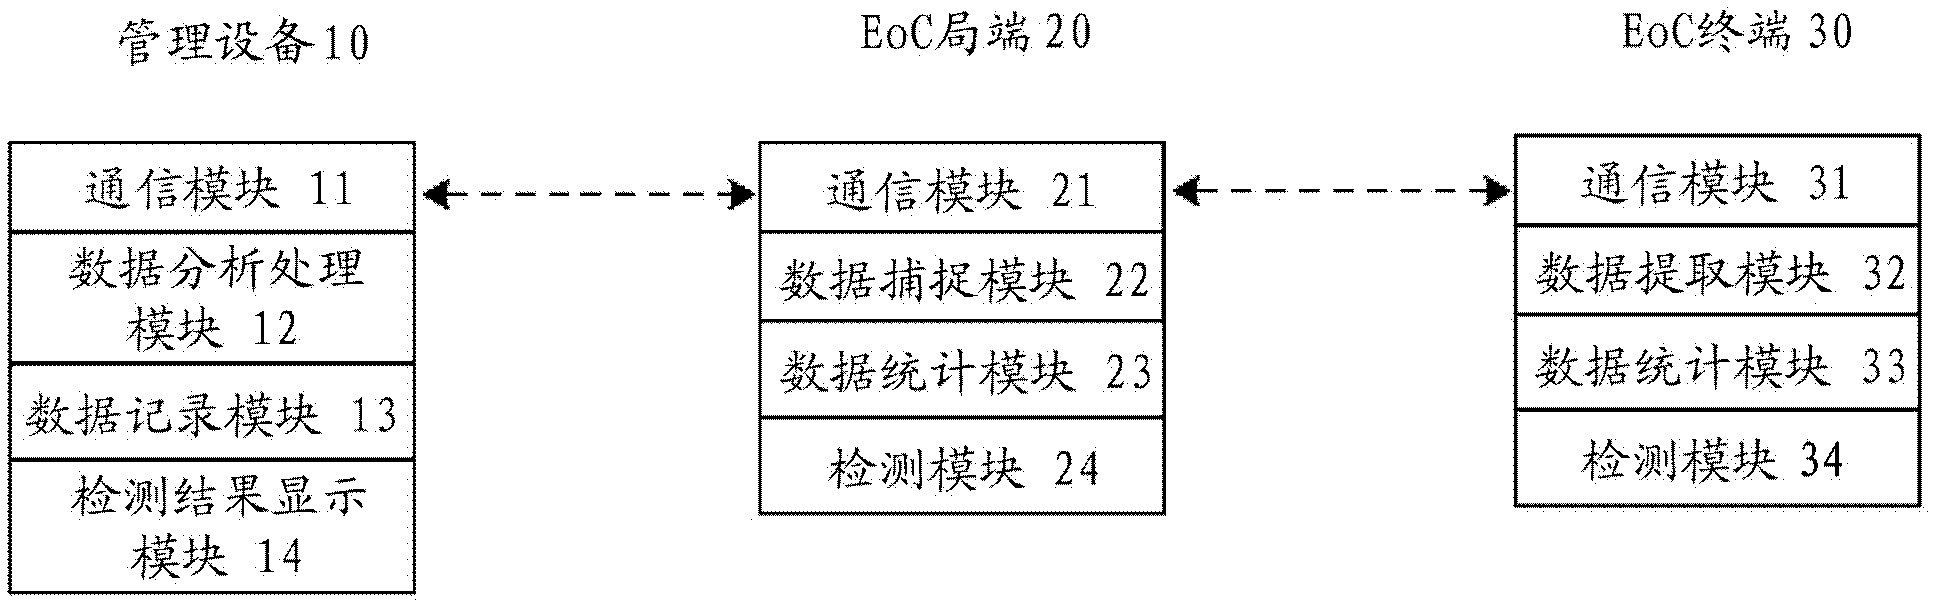 Ethernet over Coax (EoC) link failure detection system and method